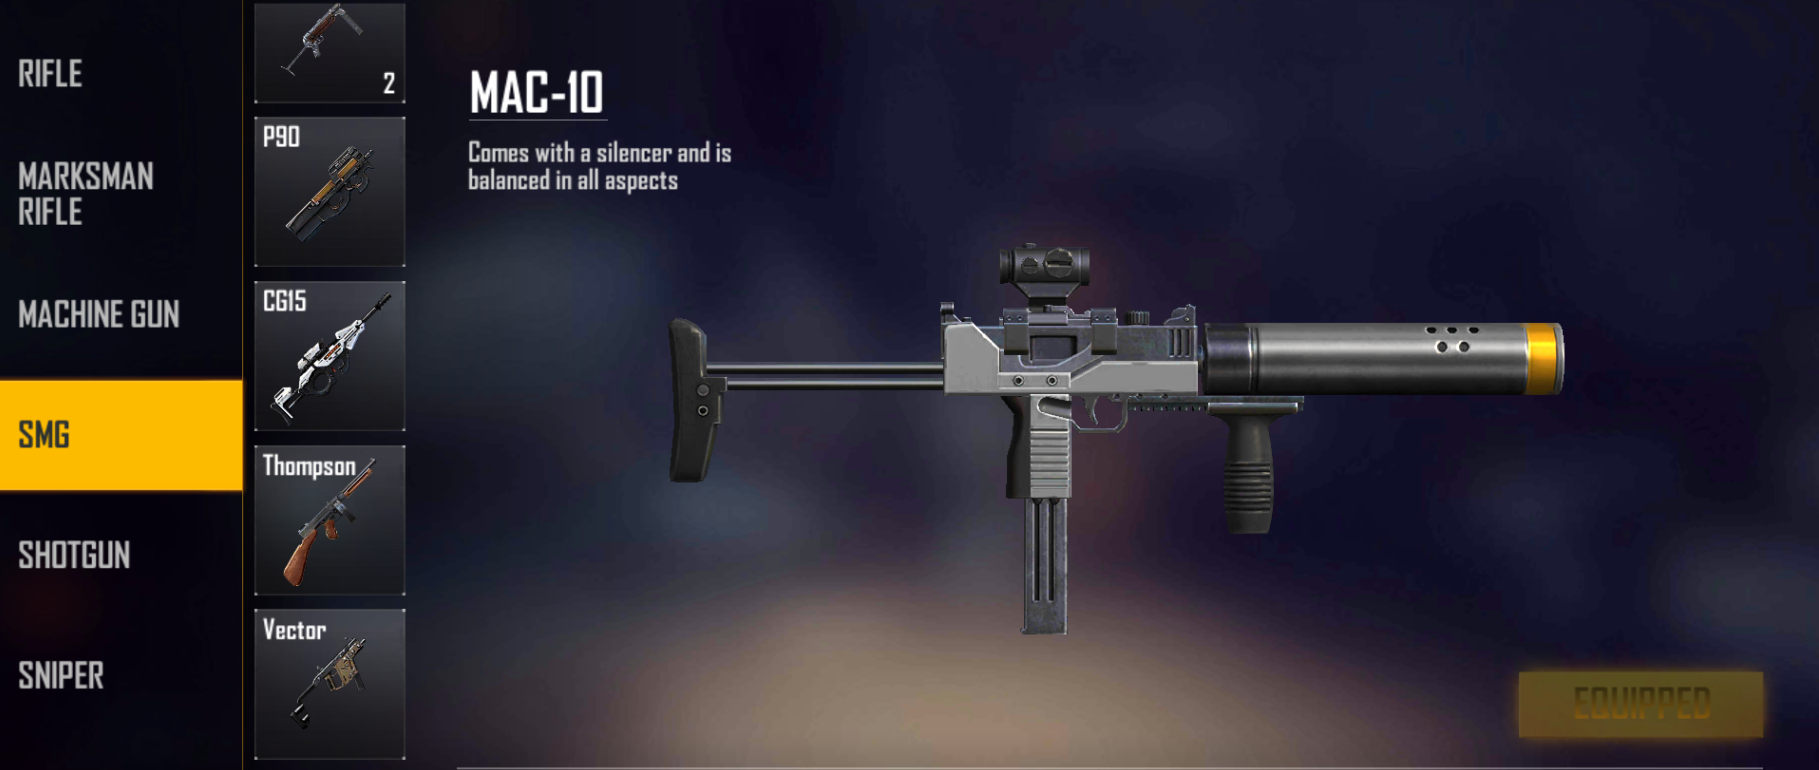 NEW MAC 10 IN FREE FIRE GAME